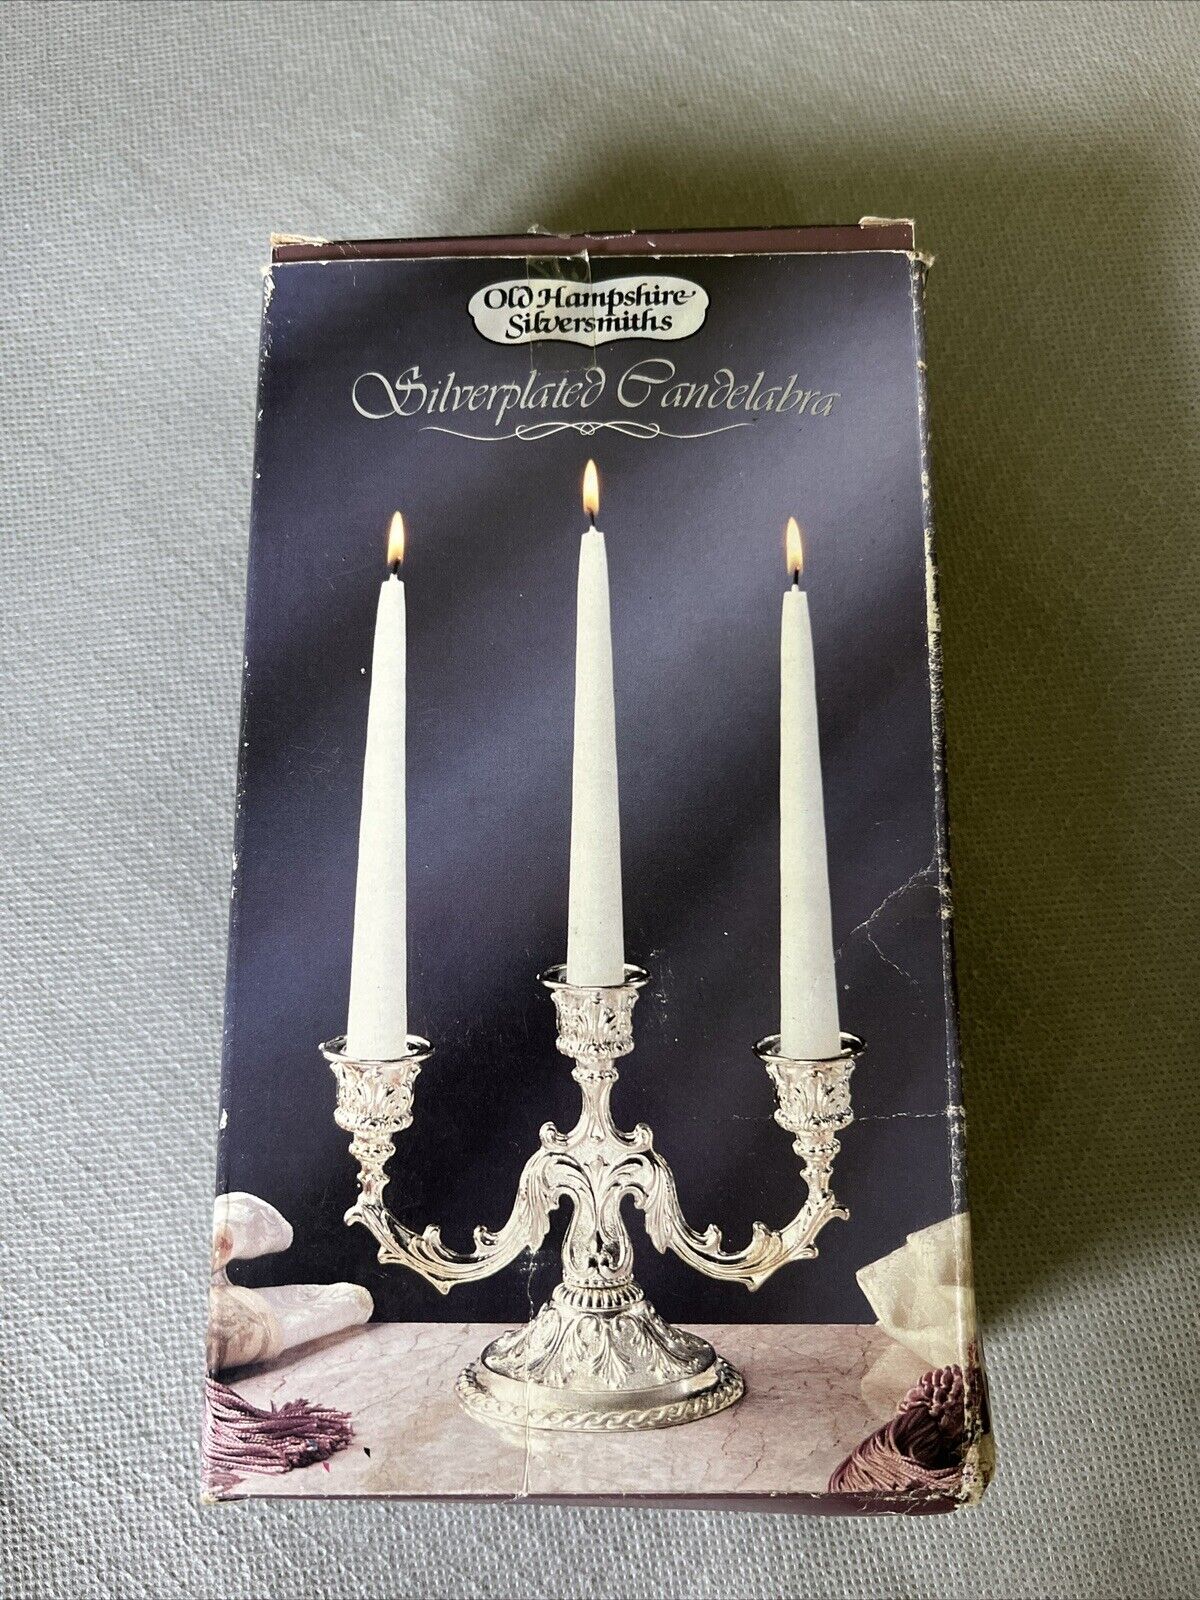 Vintage Old Hampshire Silversmiths Silverplated Candelabra New